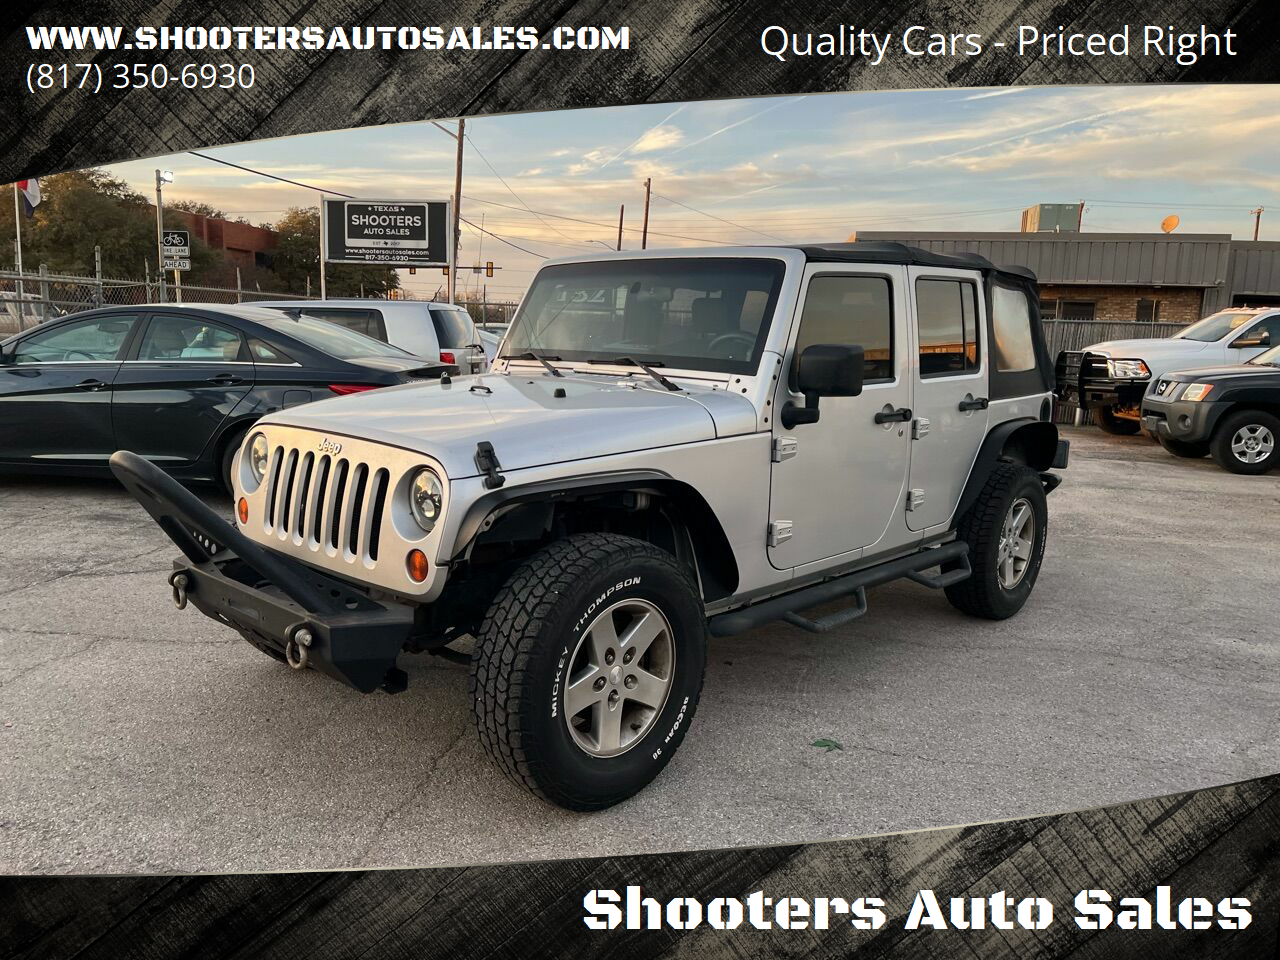 2008 Jeep Wrangler For Sale In Texas ®